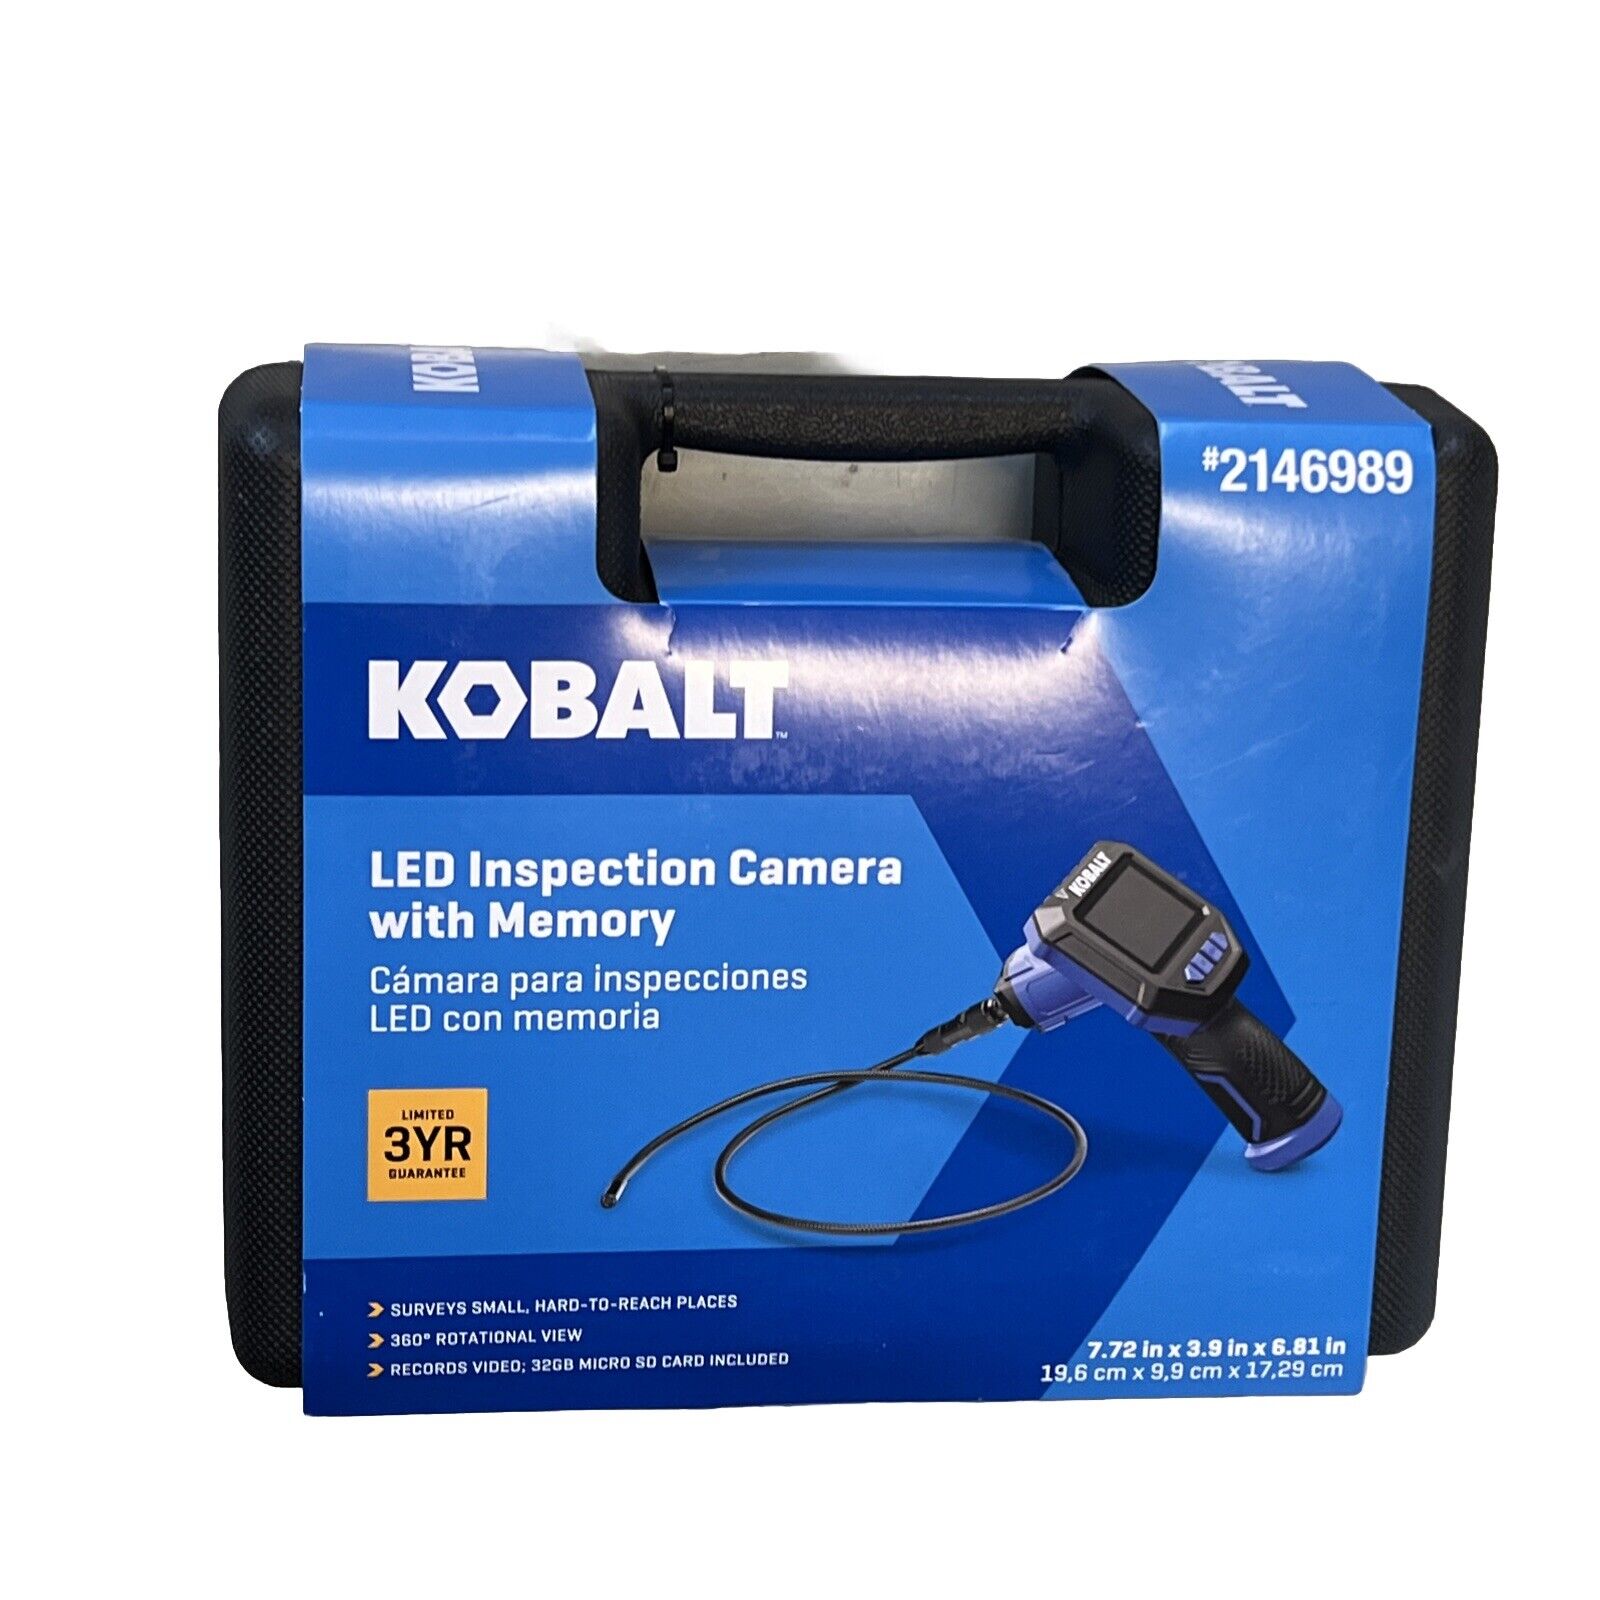 NEW Kobalt Led Inspection camera with memory 39in brand new 2146989  (A